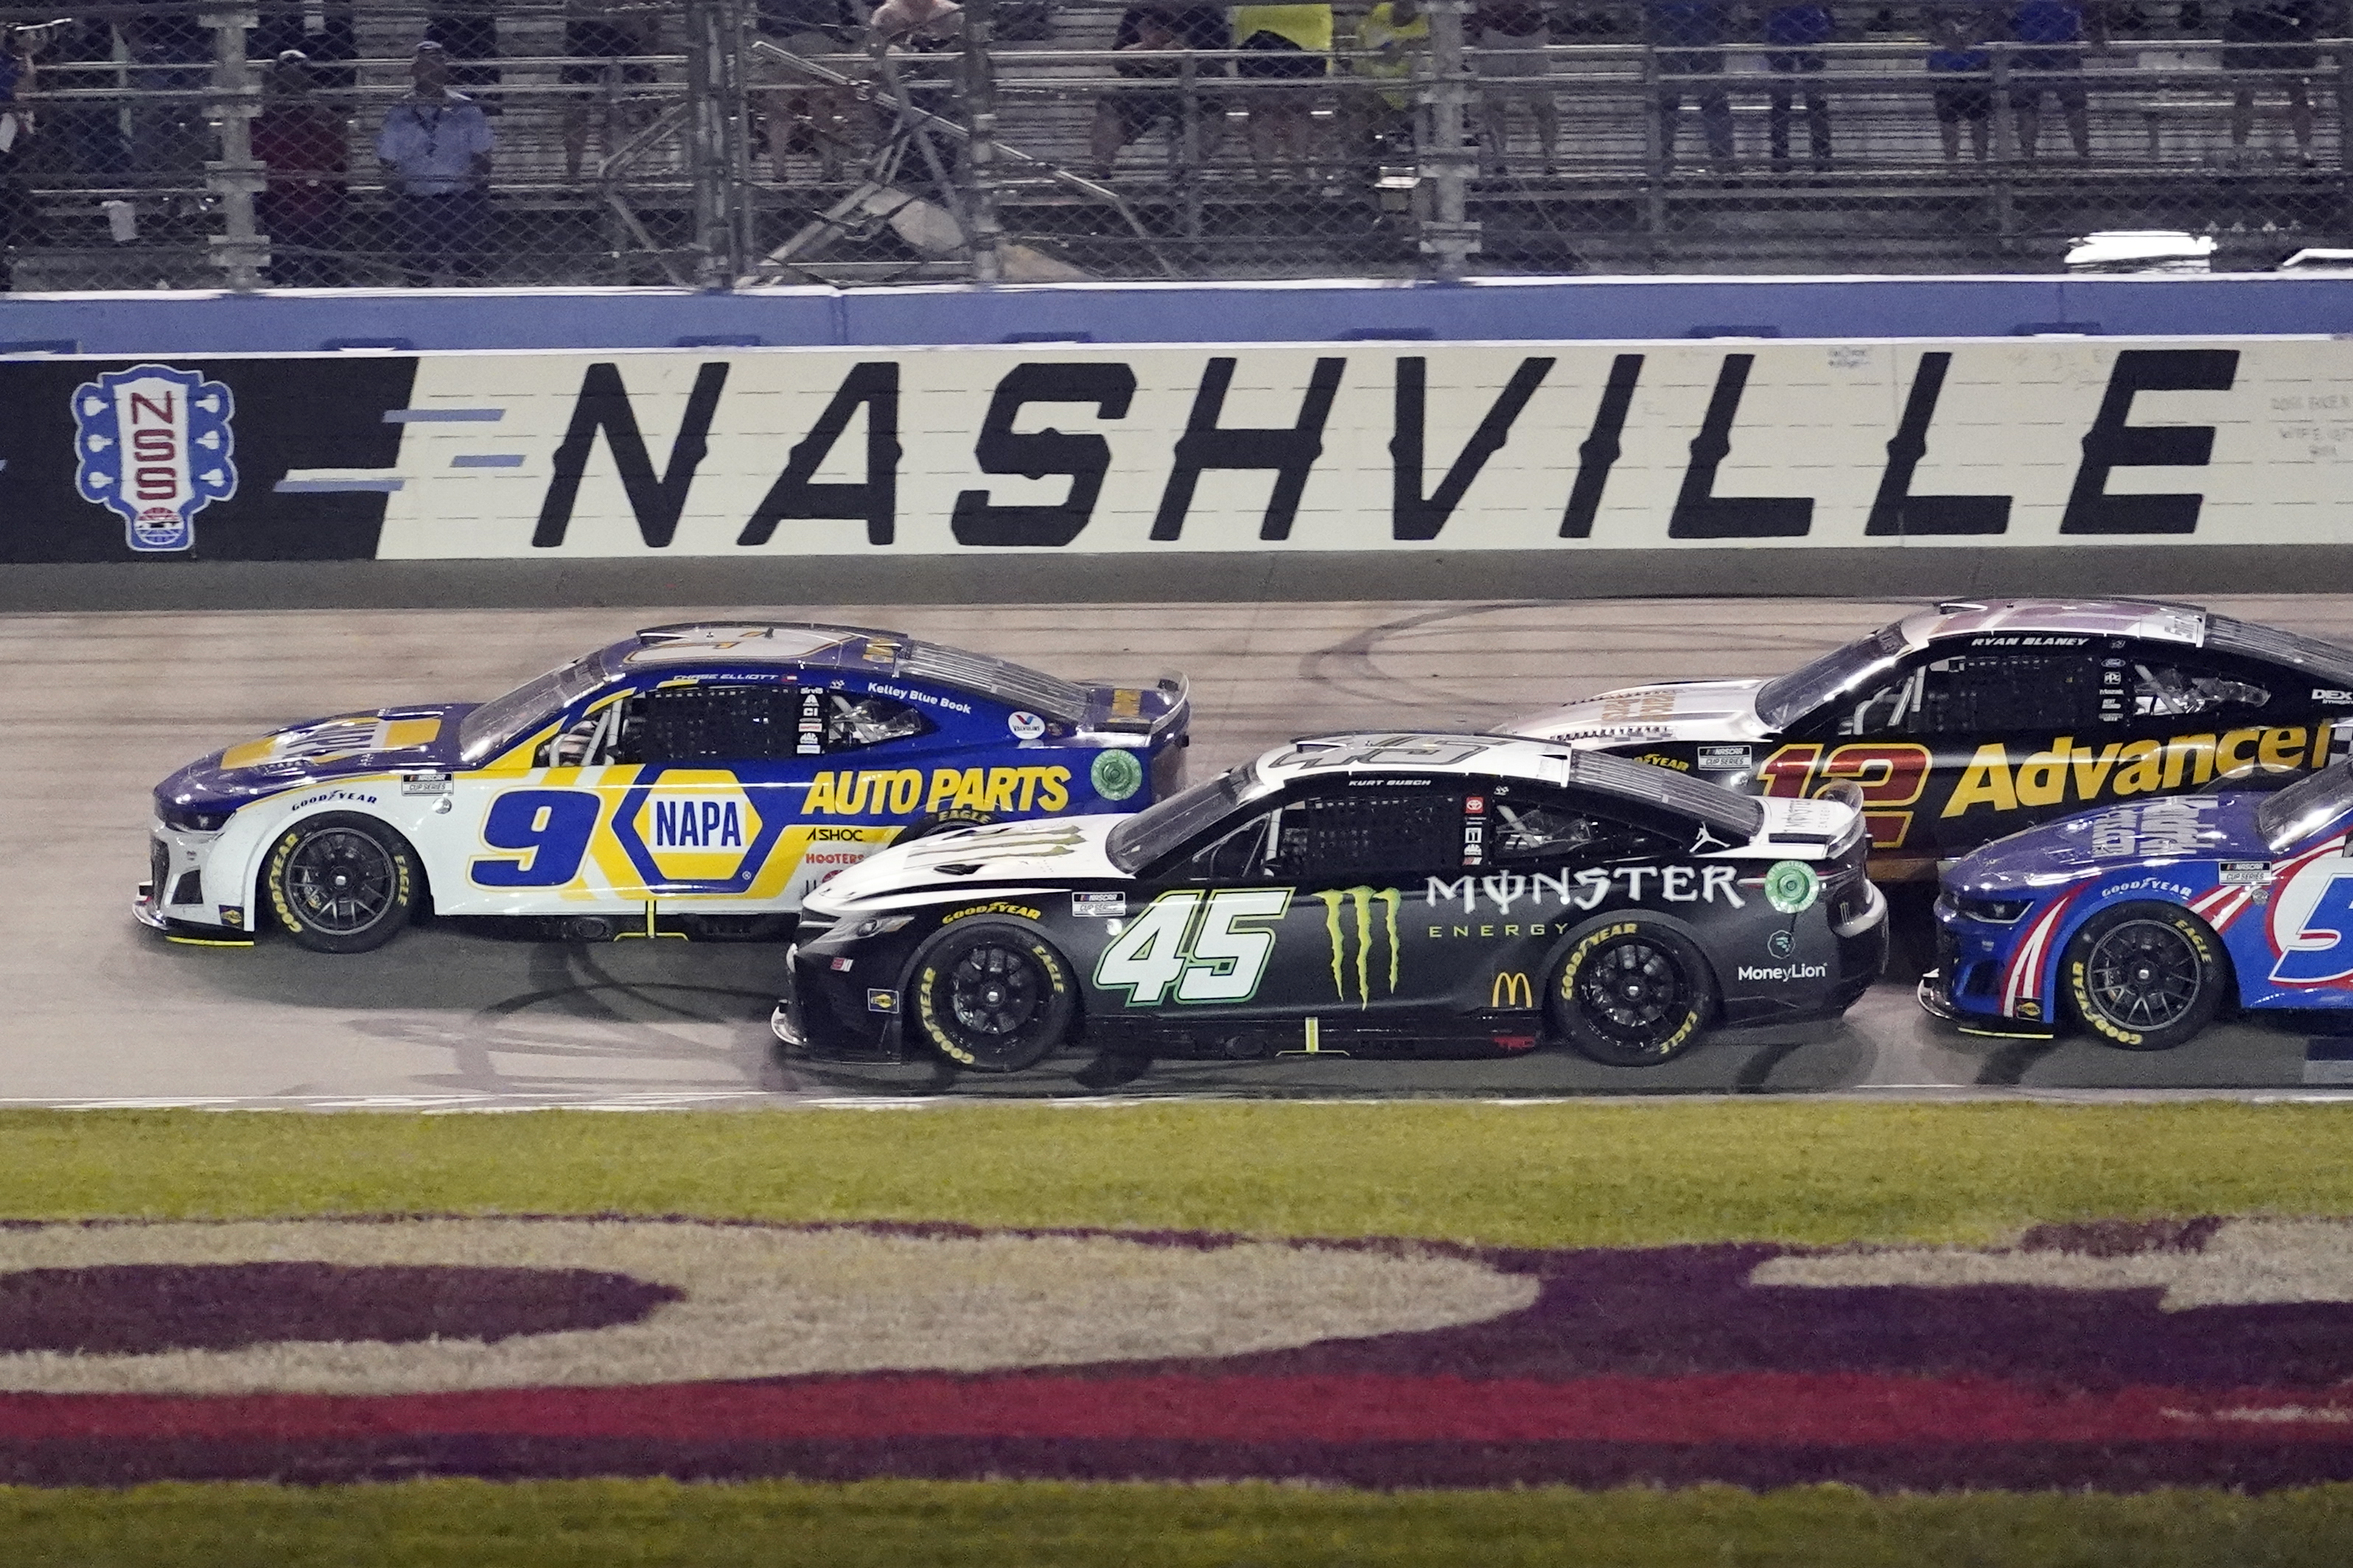 NASCAR race at Nashville Free live stream, TV, how to watch Ally 400